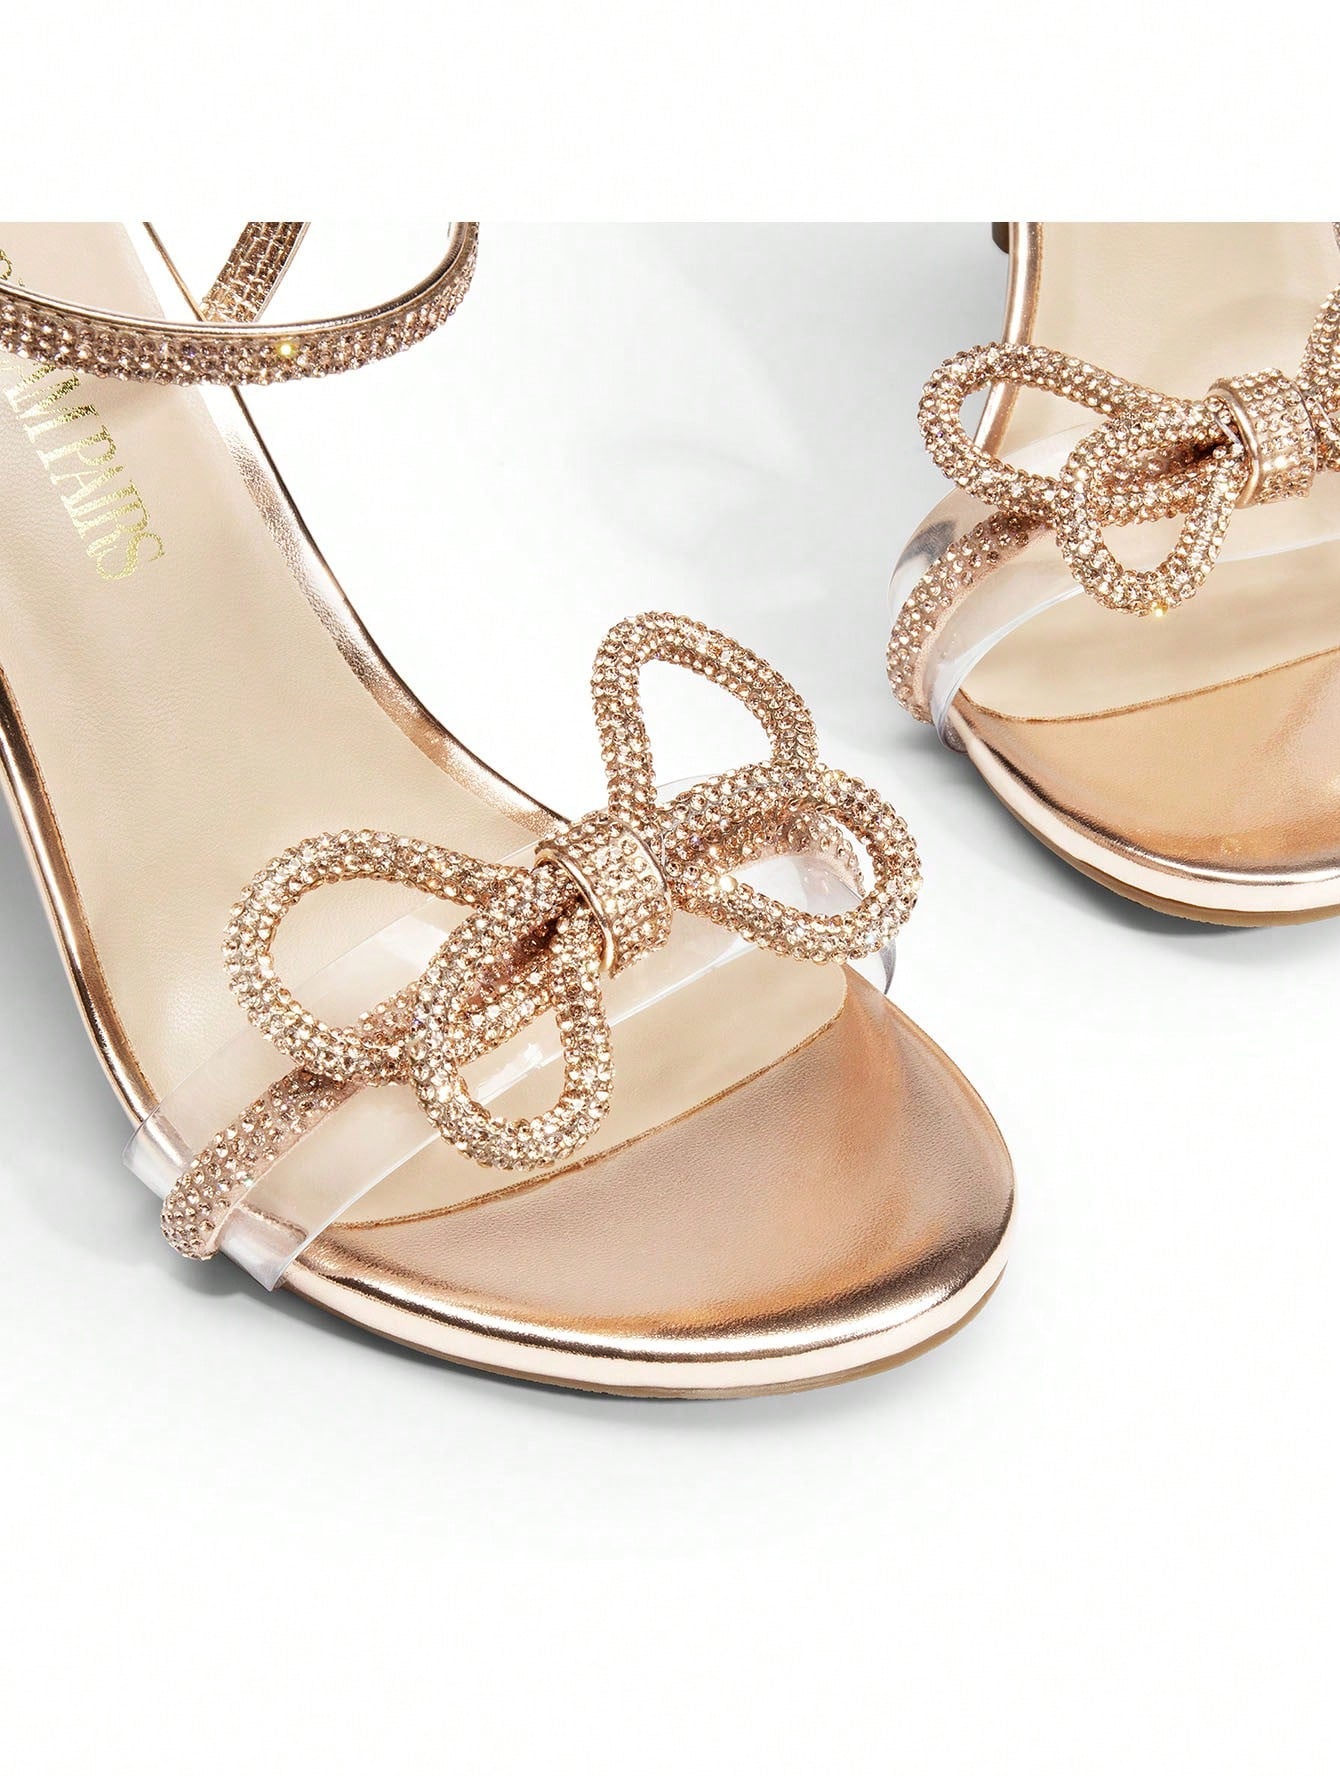 Women Double Bowknots Crystal Heeled Sandals, Open Toe Sparkly Stilettos Summer Sandals For Party Wedding Prom-Rose Gold-6